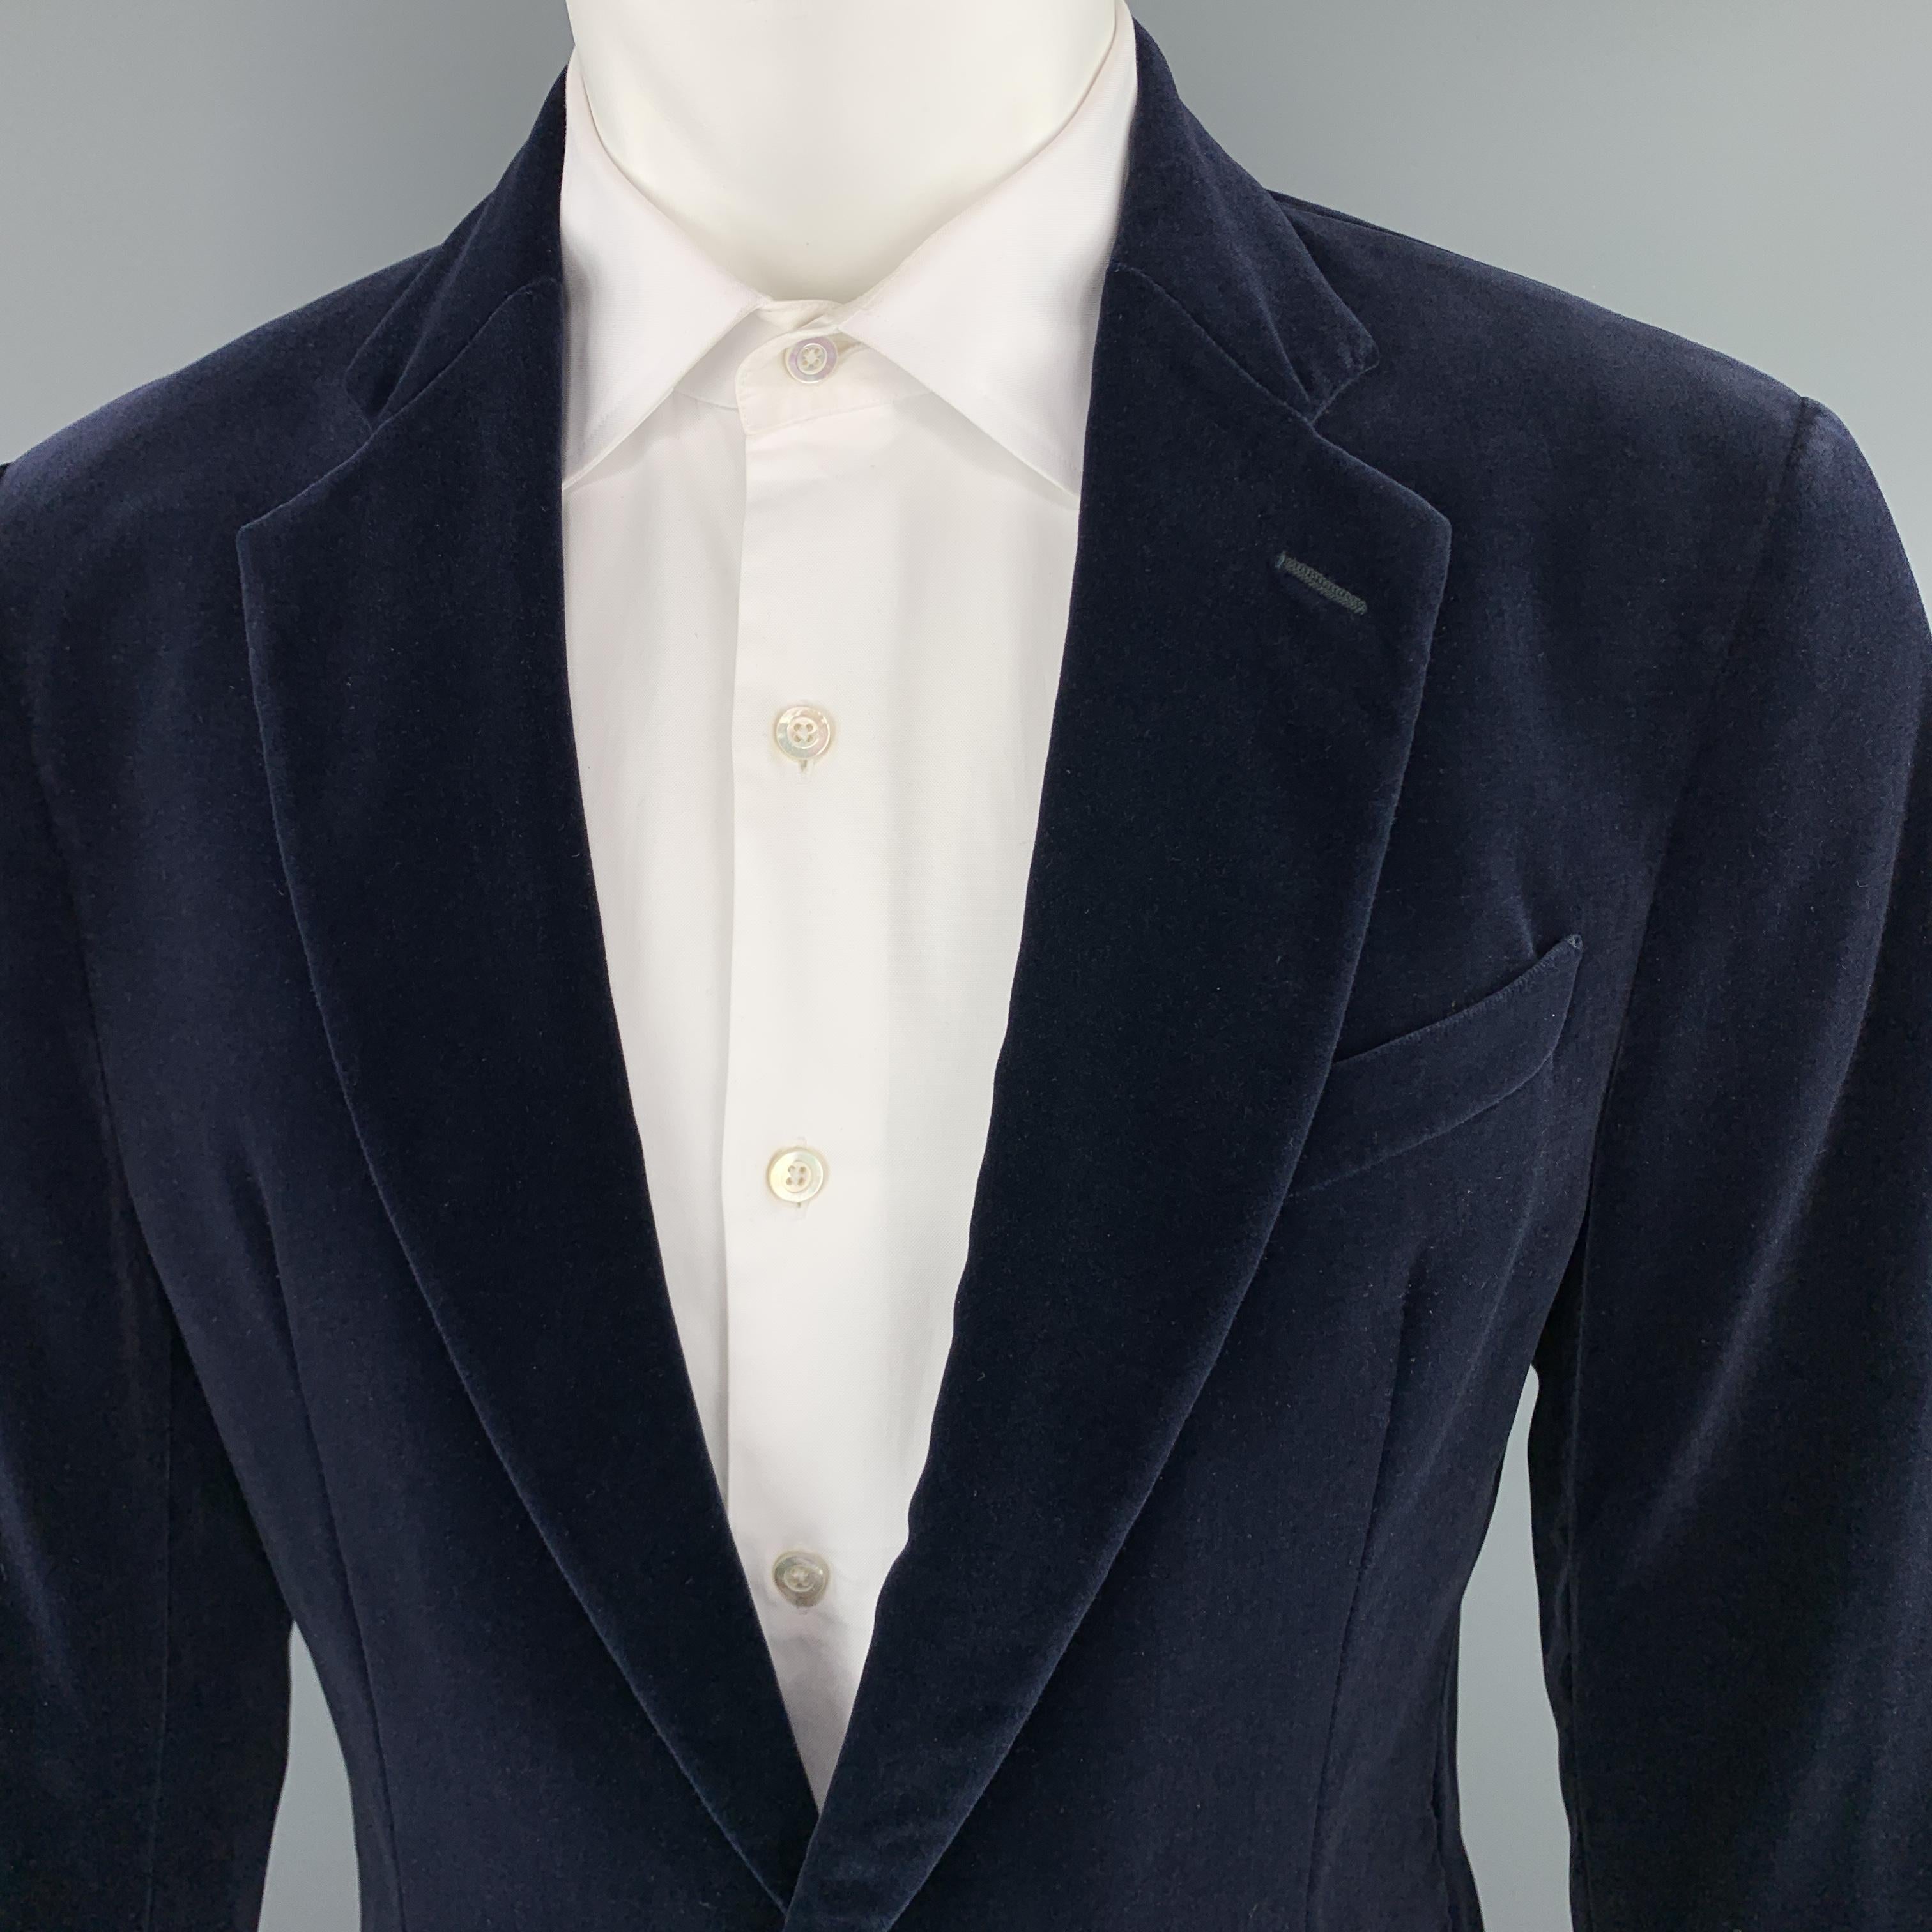 ARMANI COLLEZIONI sport coat comes in navy blue velvet with a notch lapel, single breasted, two button front, and ventless back.

Excellent Pre-Owned Condition.
Marked: 40

Measurements:

Shoulder: 18 in.
Chest: 44 in.
Sleeve: 22.5 in.
Length: 32 in.